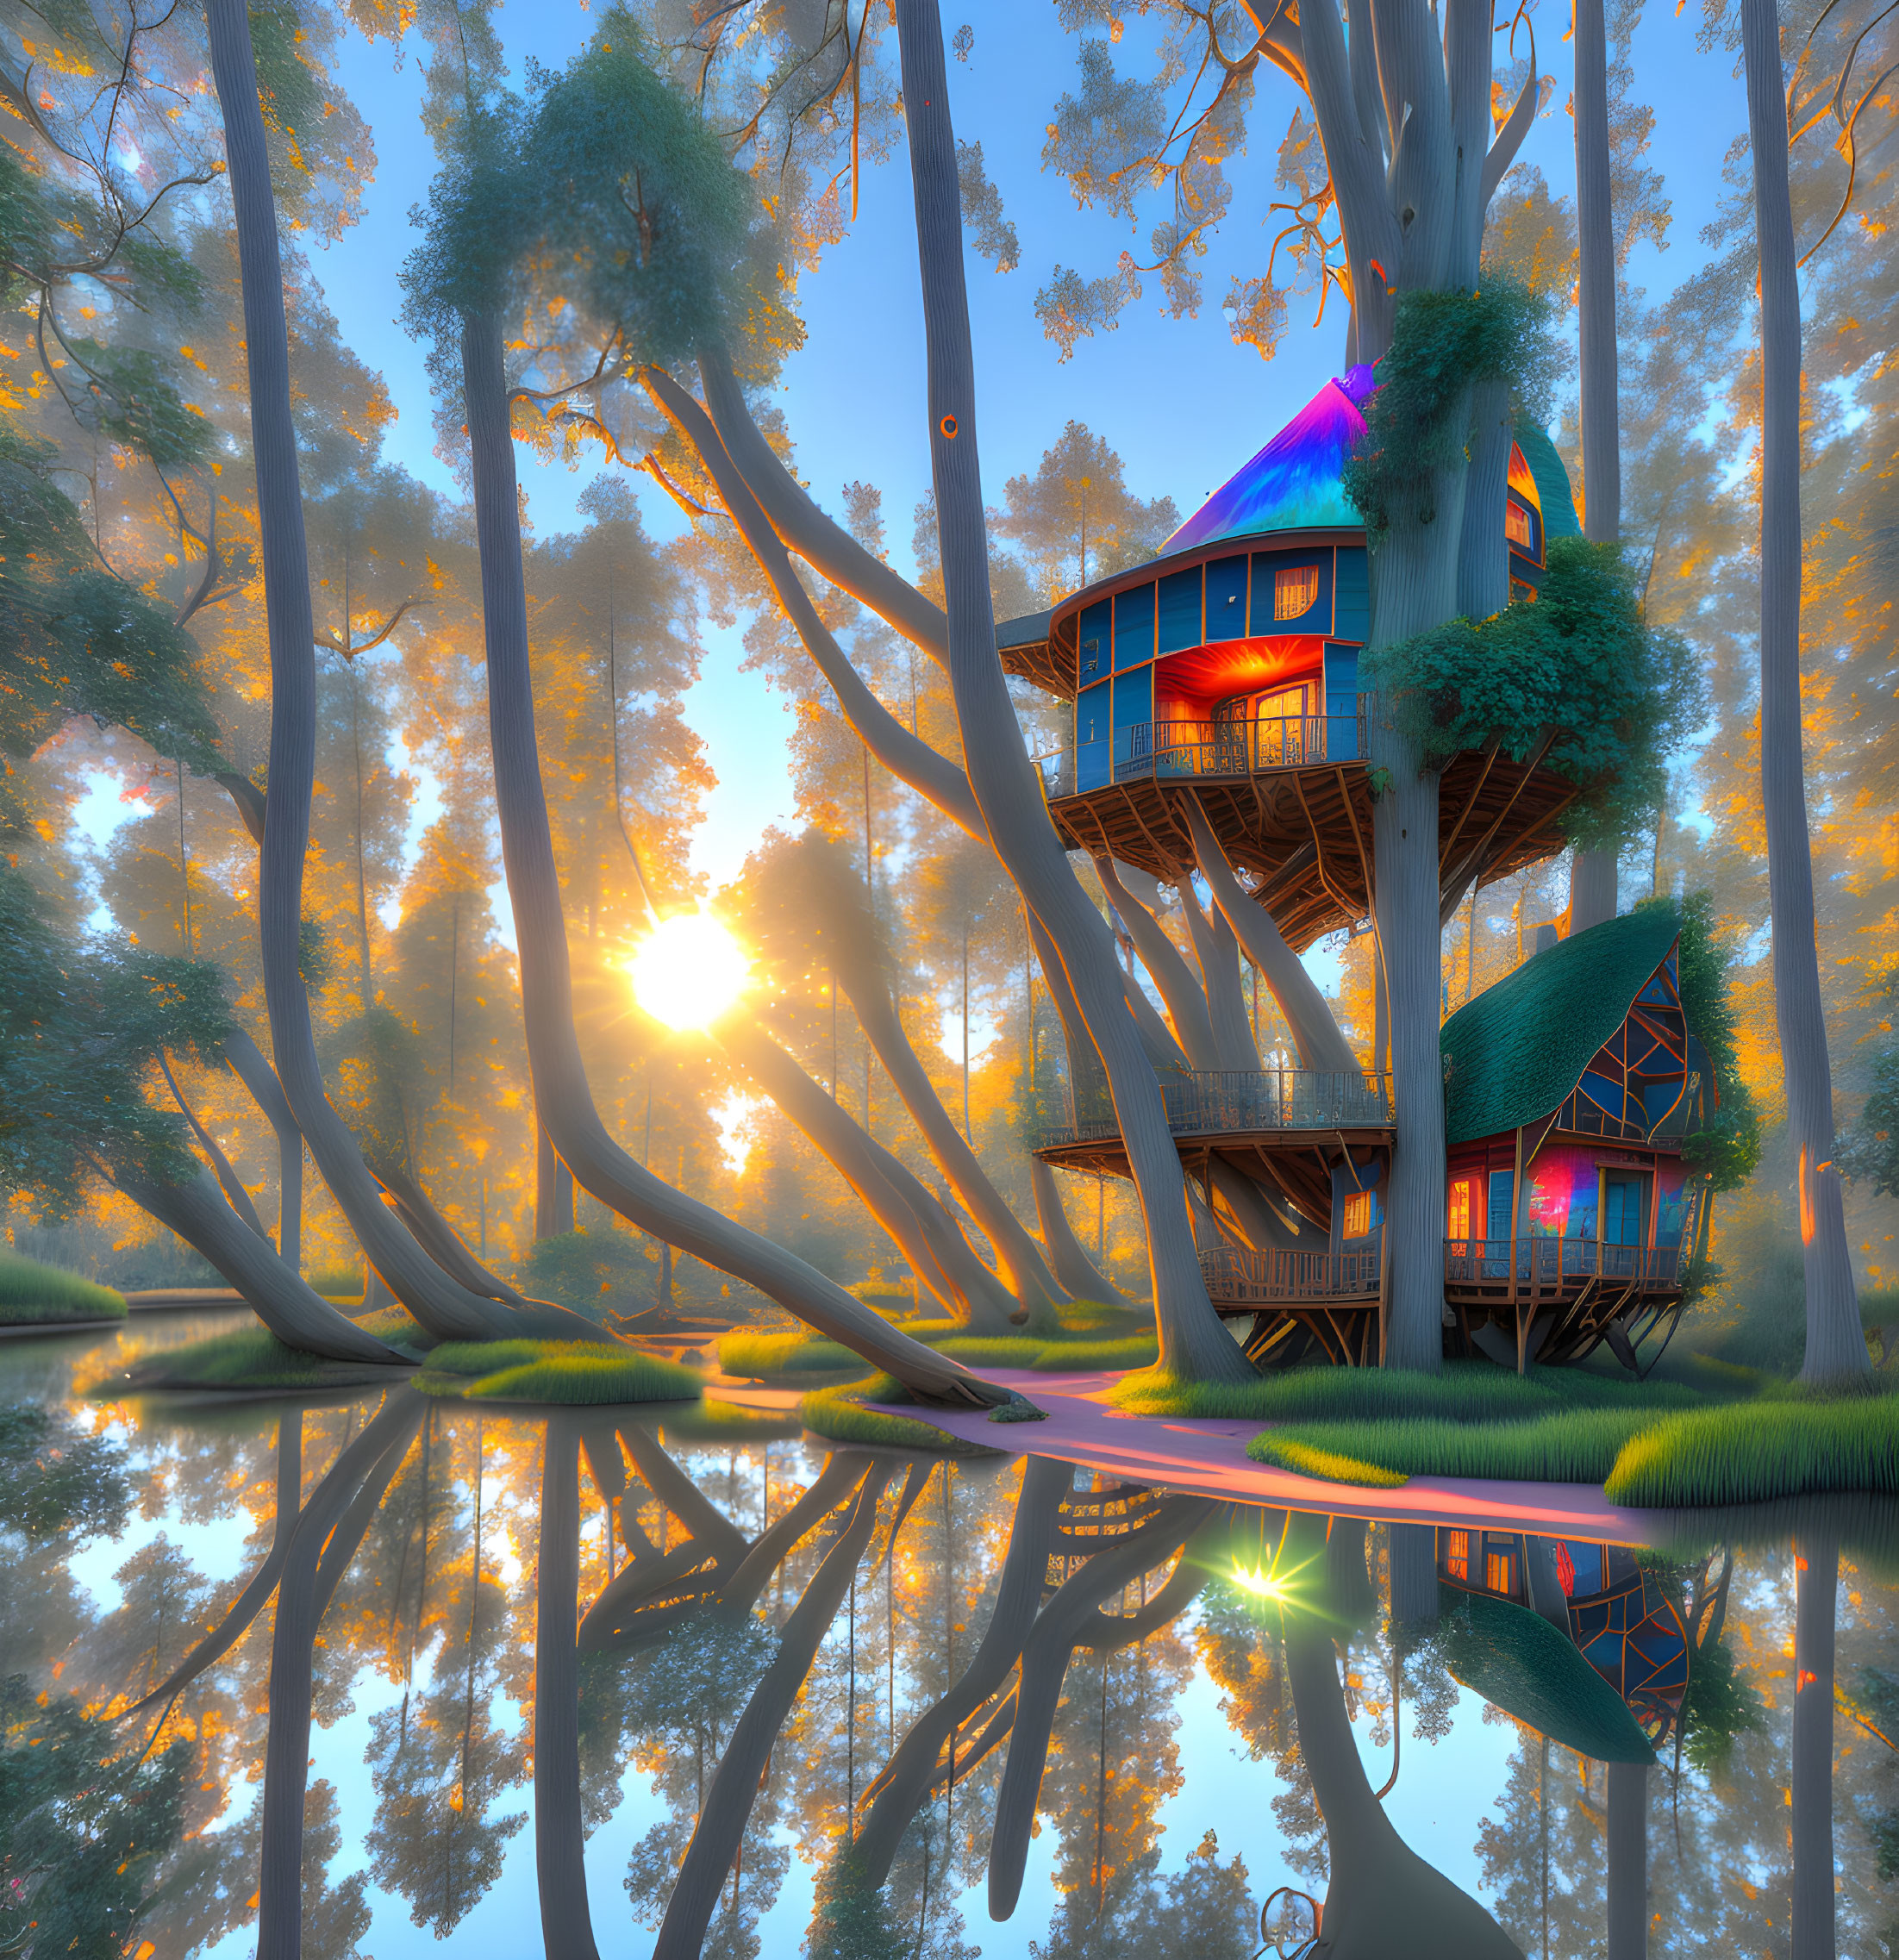 Sunset at the Treehouse